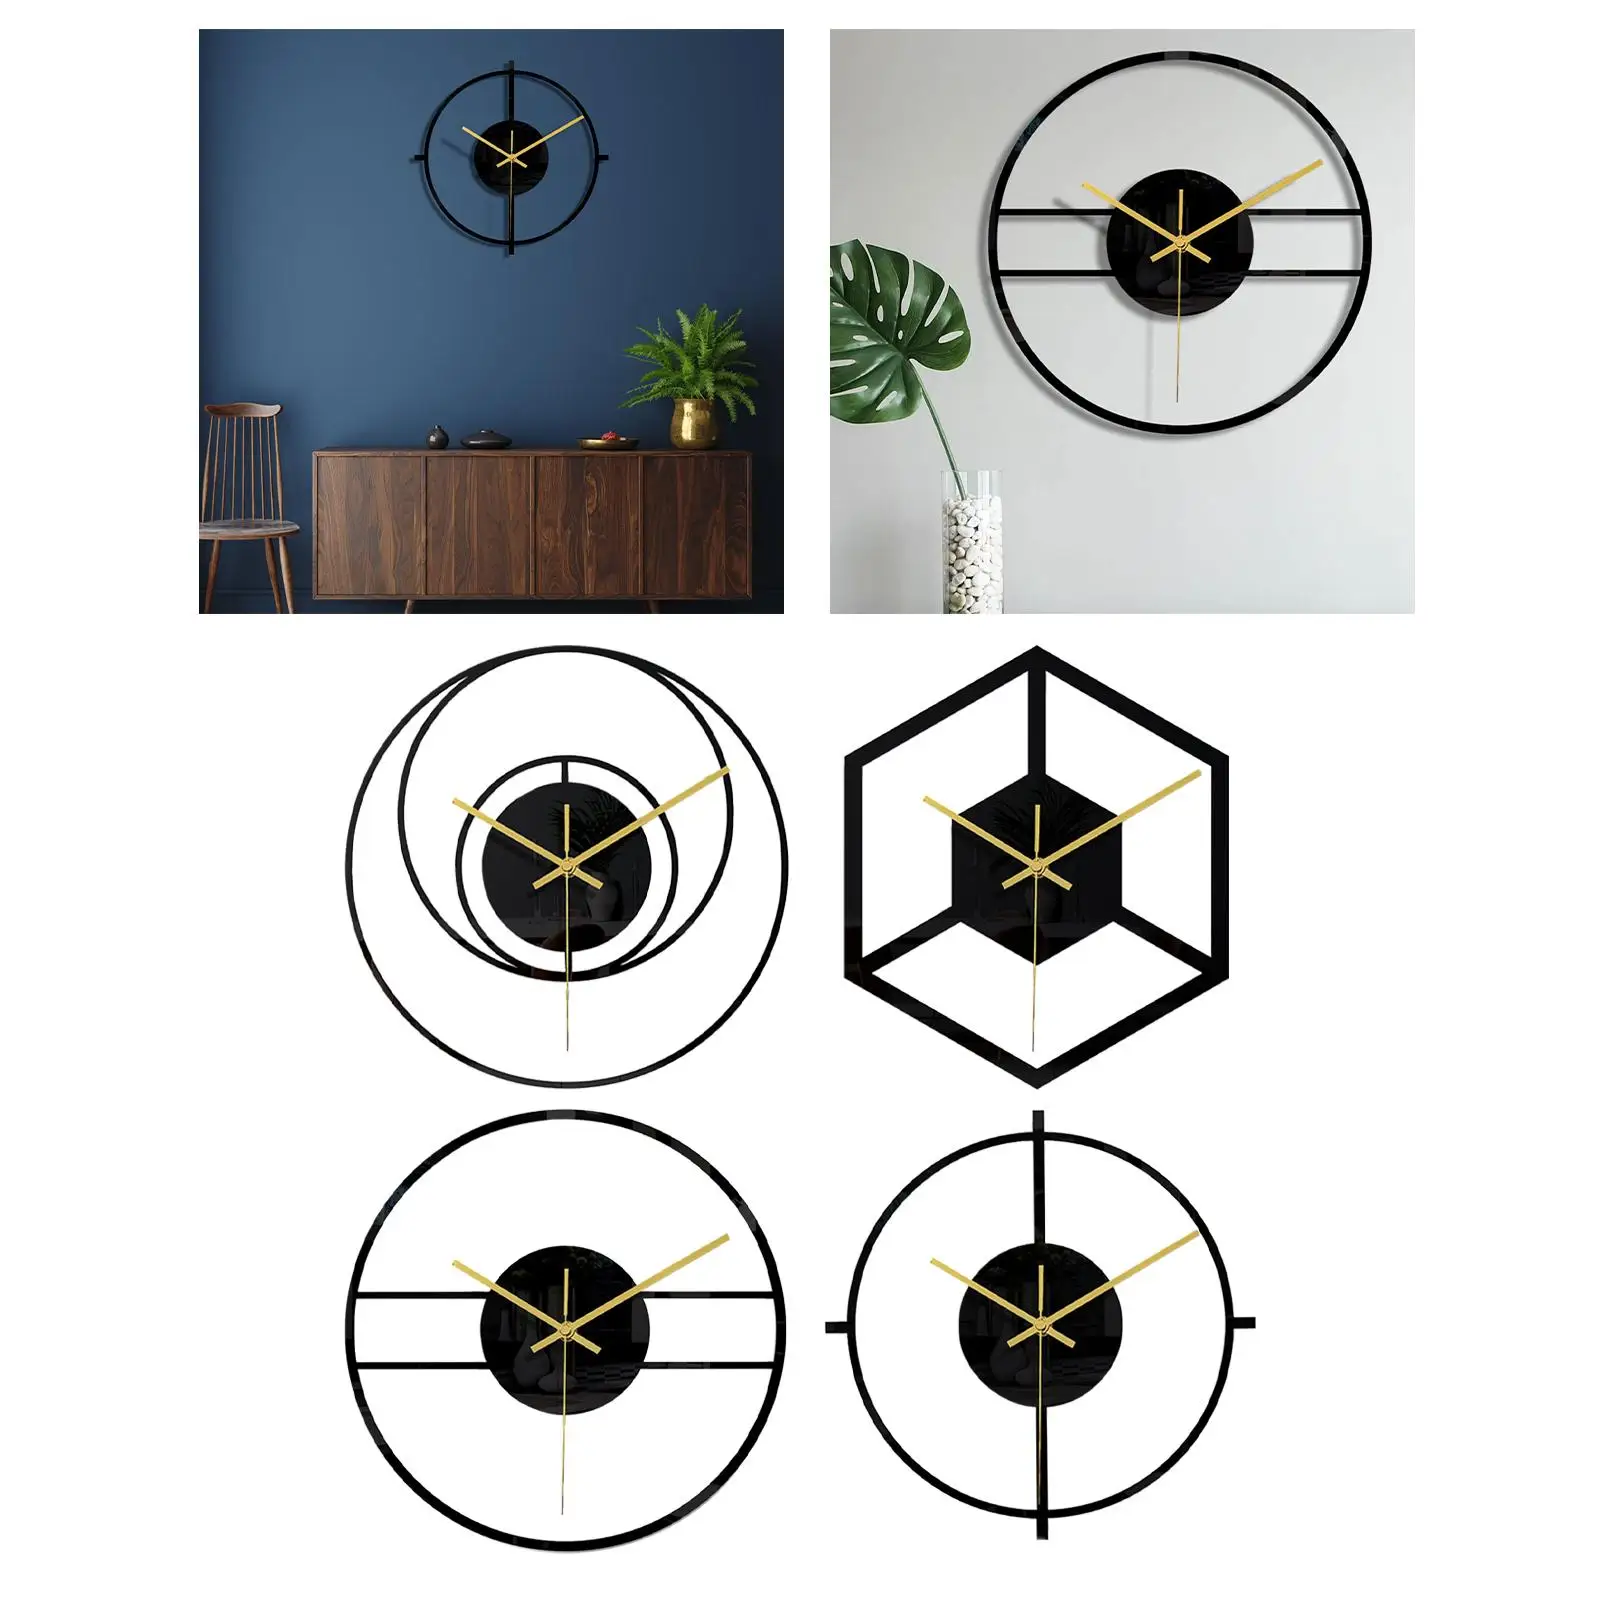 Nordic Style Wall Clocks Silent Clocks Wall Art Decor Battery Operated for Office Home Living Room Bedside Decor